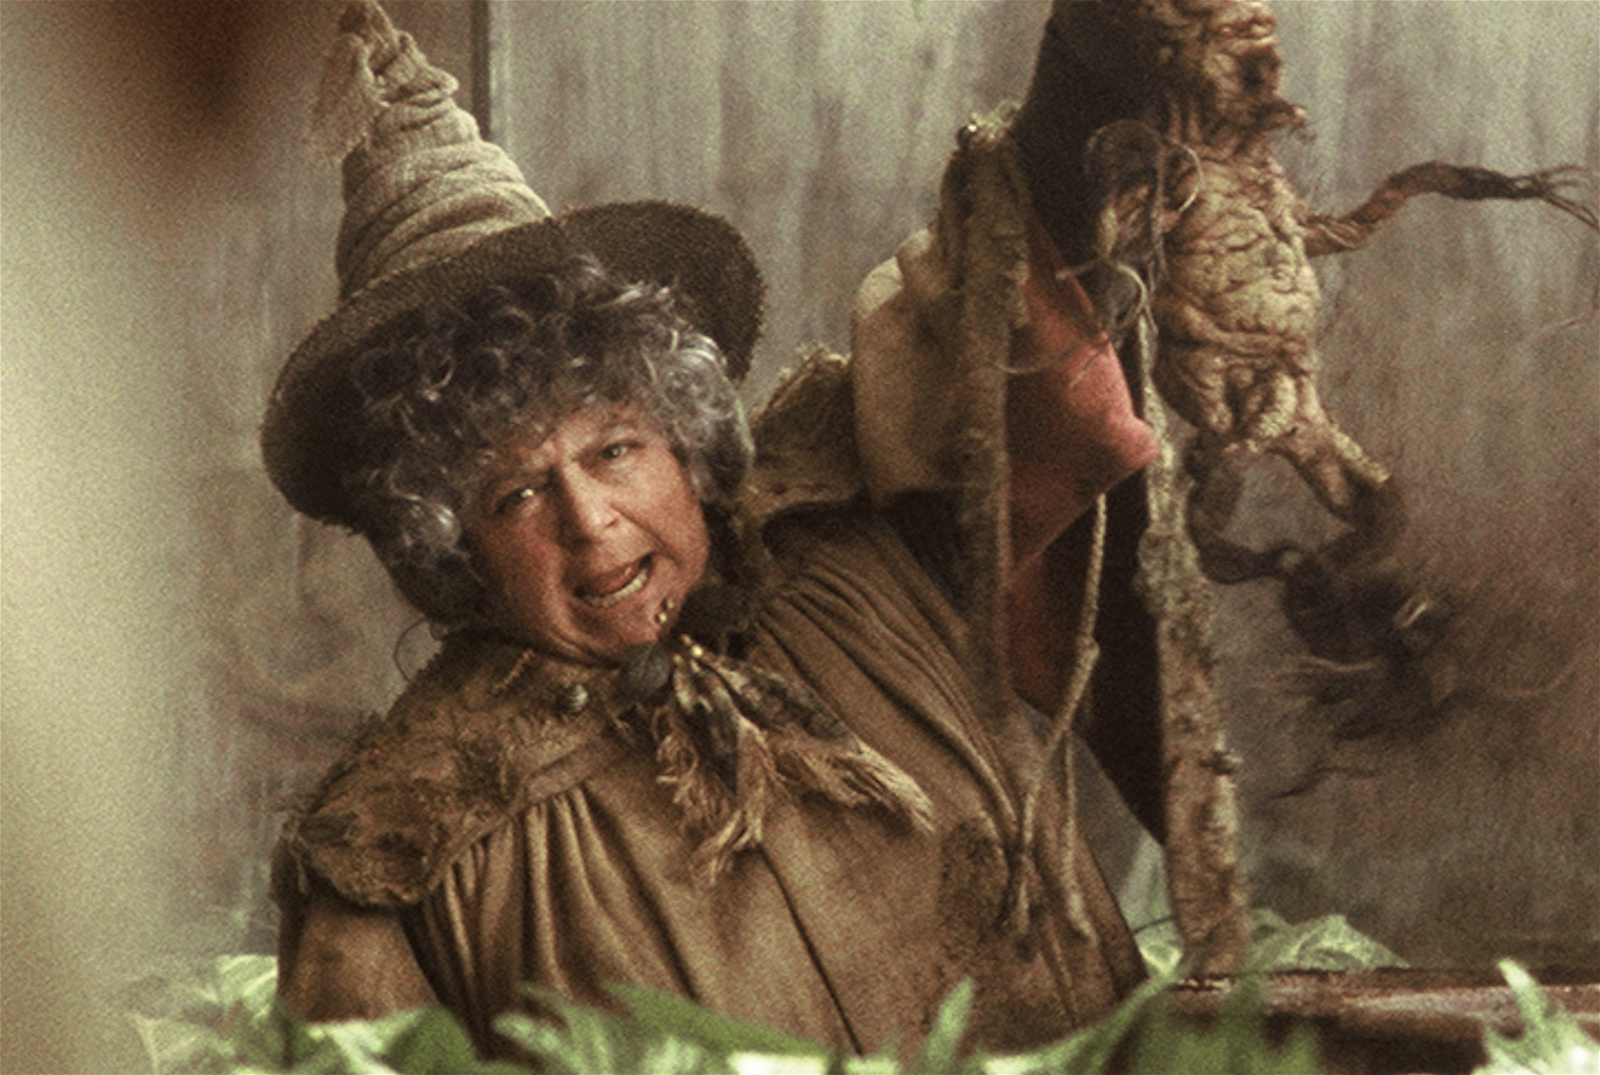 Miriam Margolyes as Professor Sprout in Harry Potter franchise